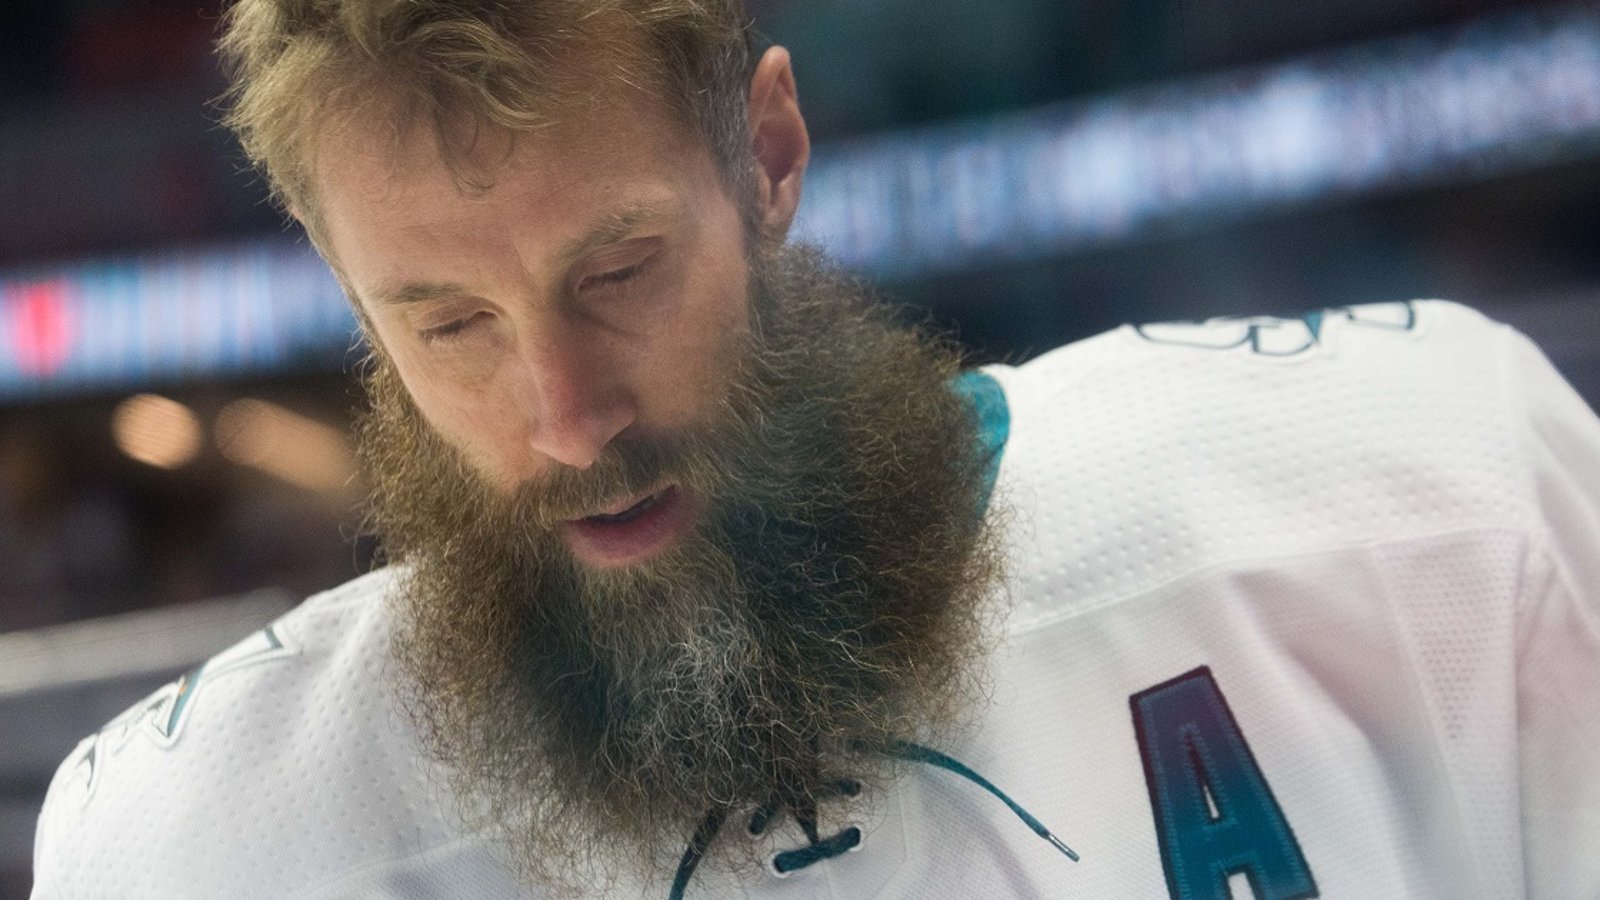 Joe Thornton's National League training suspended due to COVID-19.